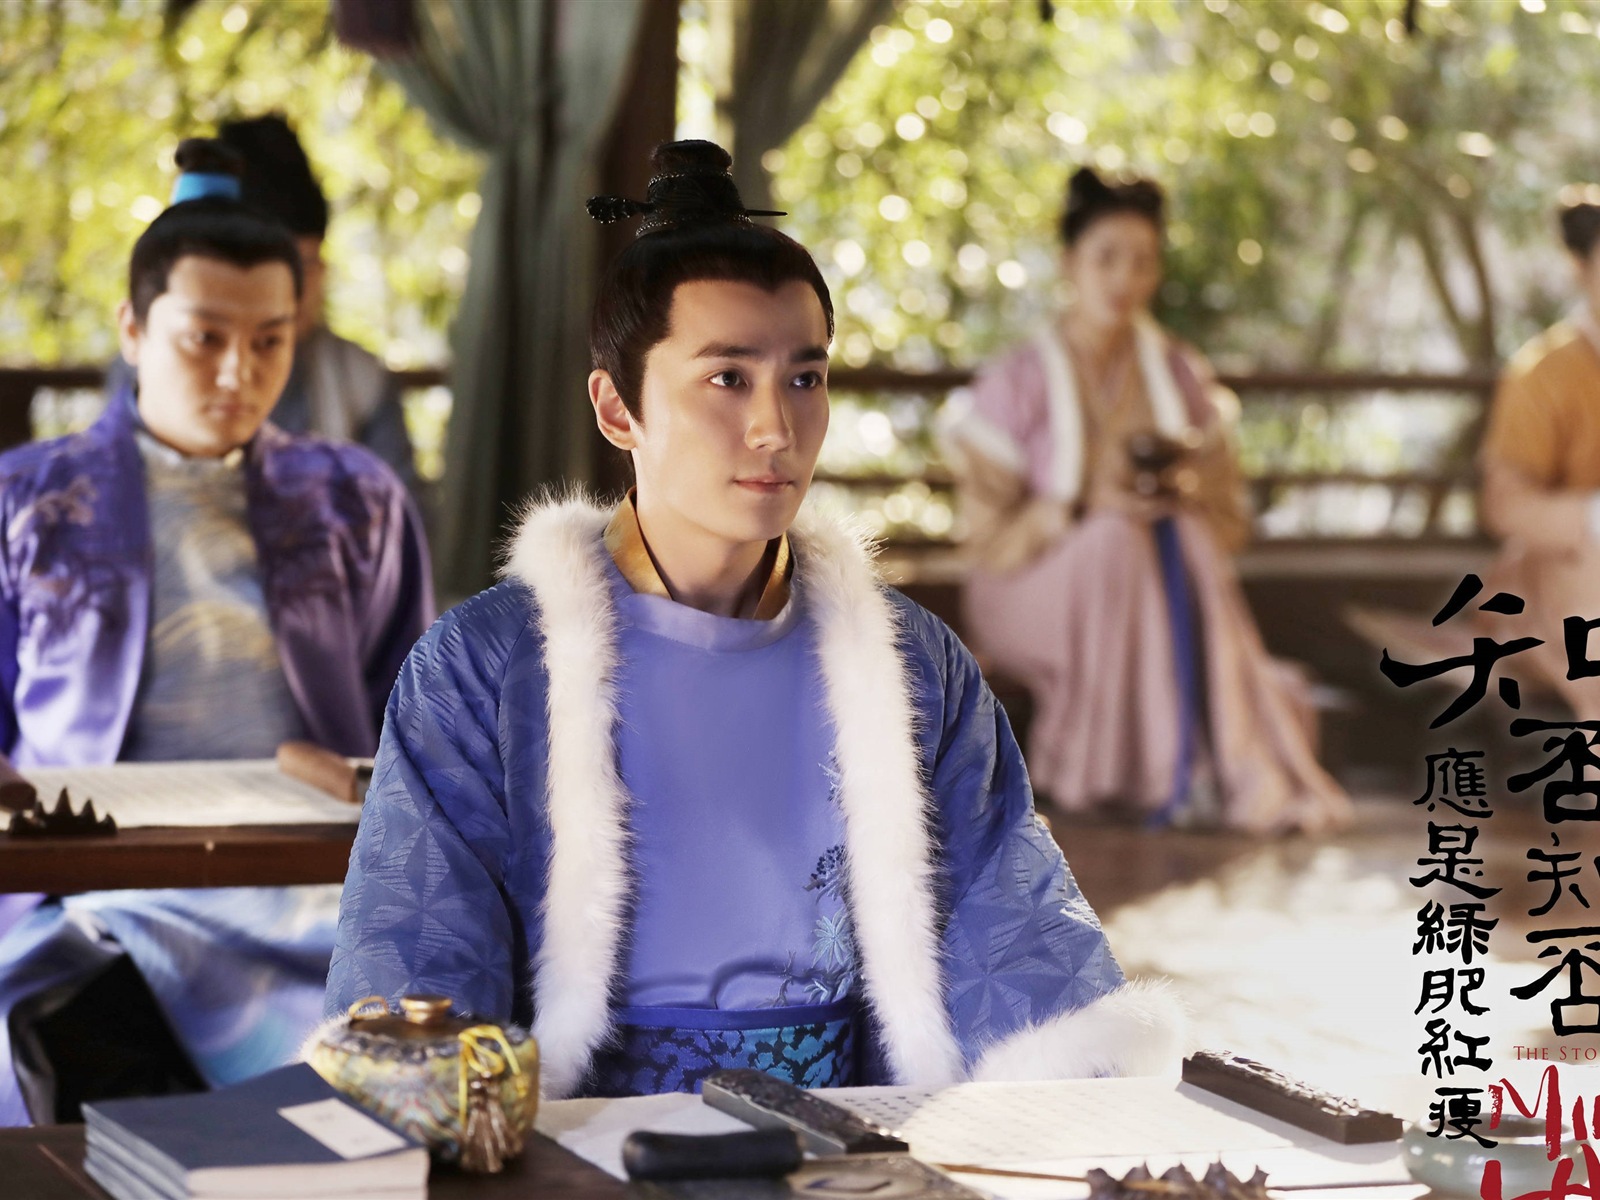 The Story Of MingLan, TV series HD wallpapers #52 - 1600x1200